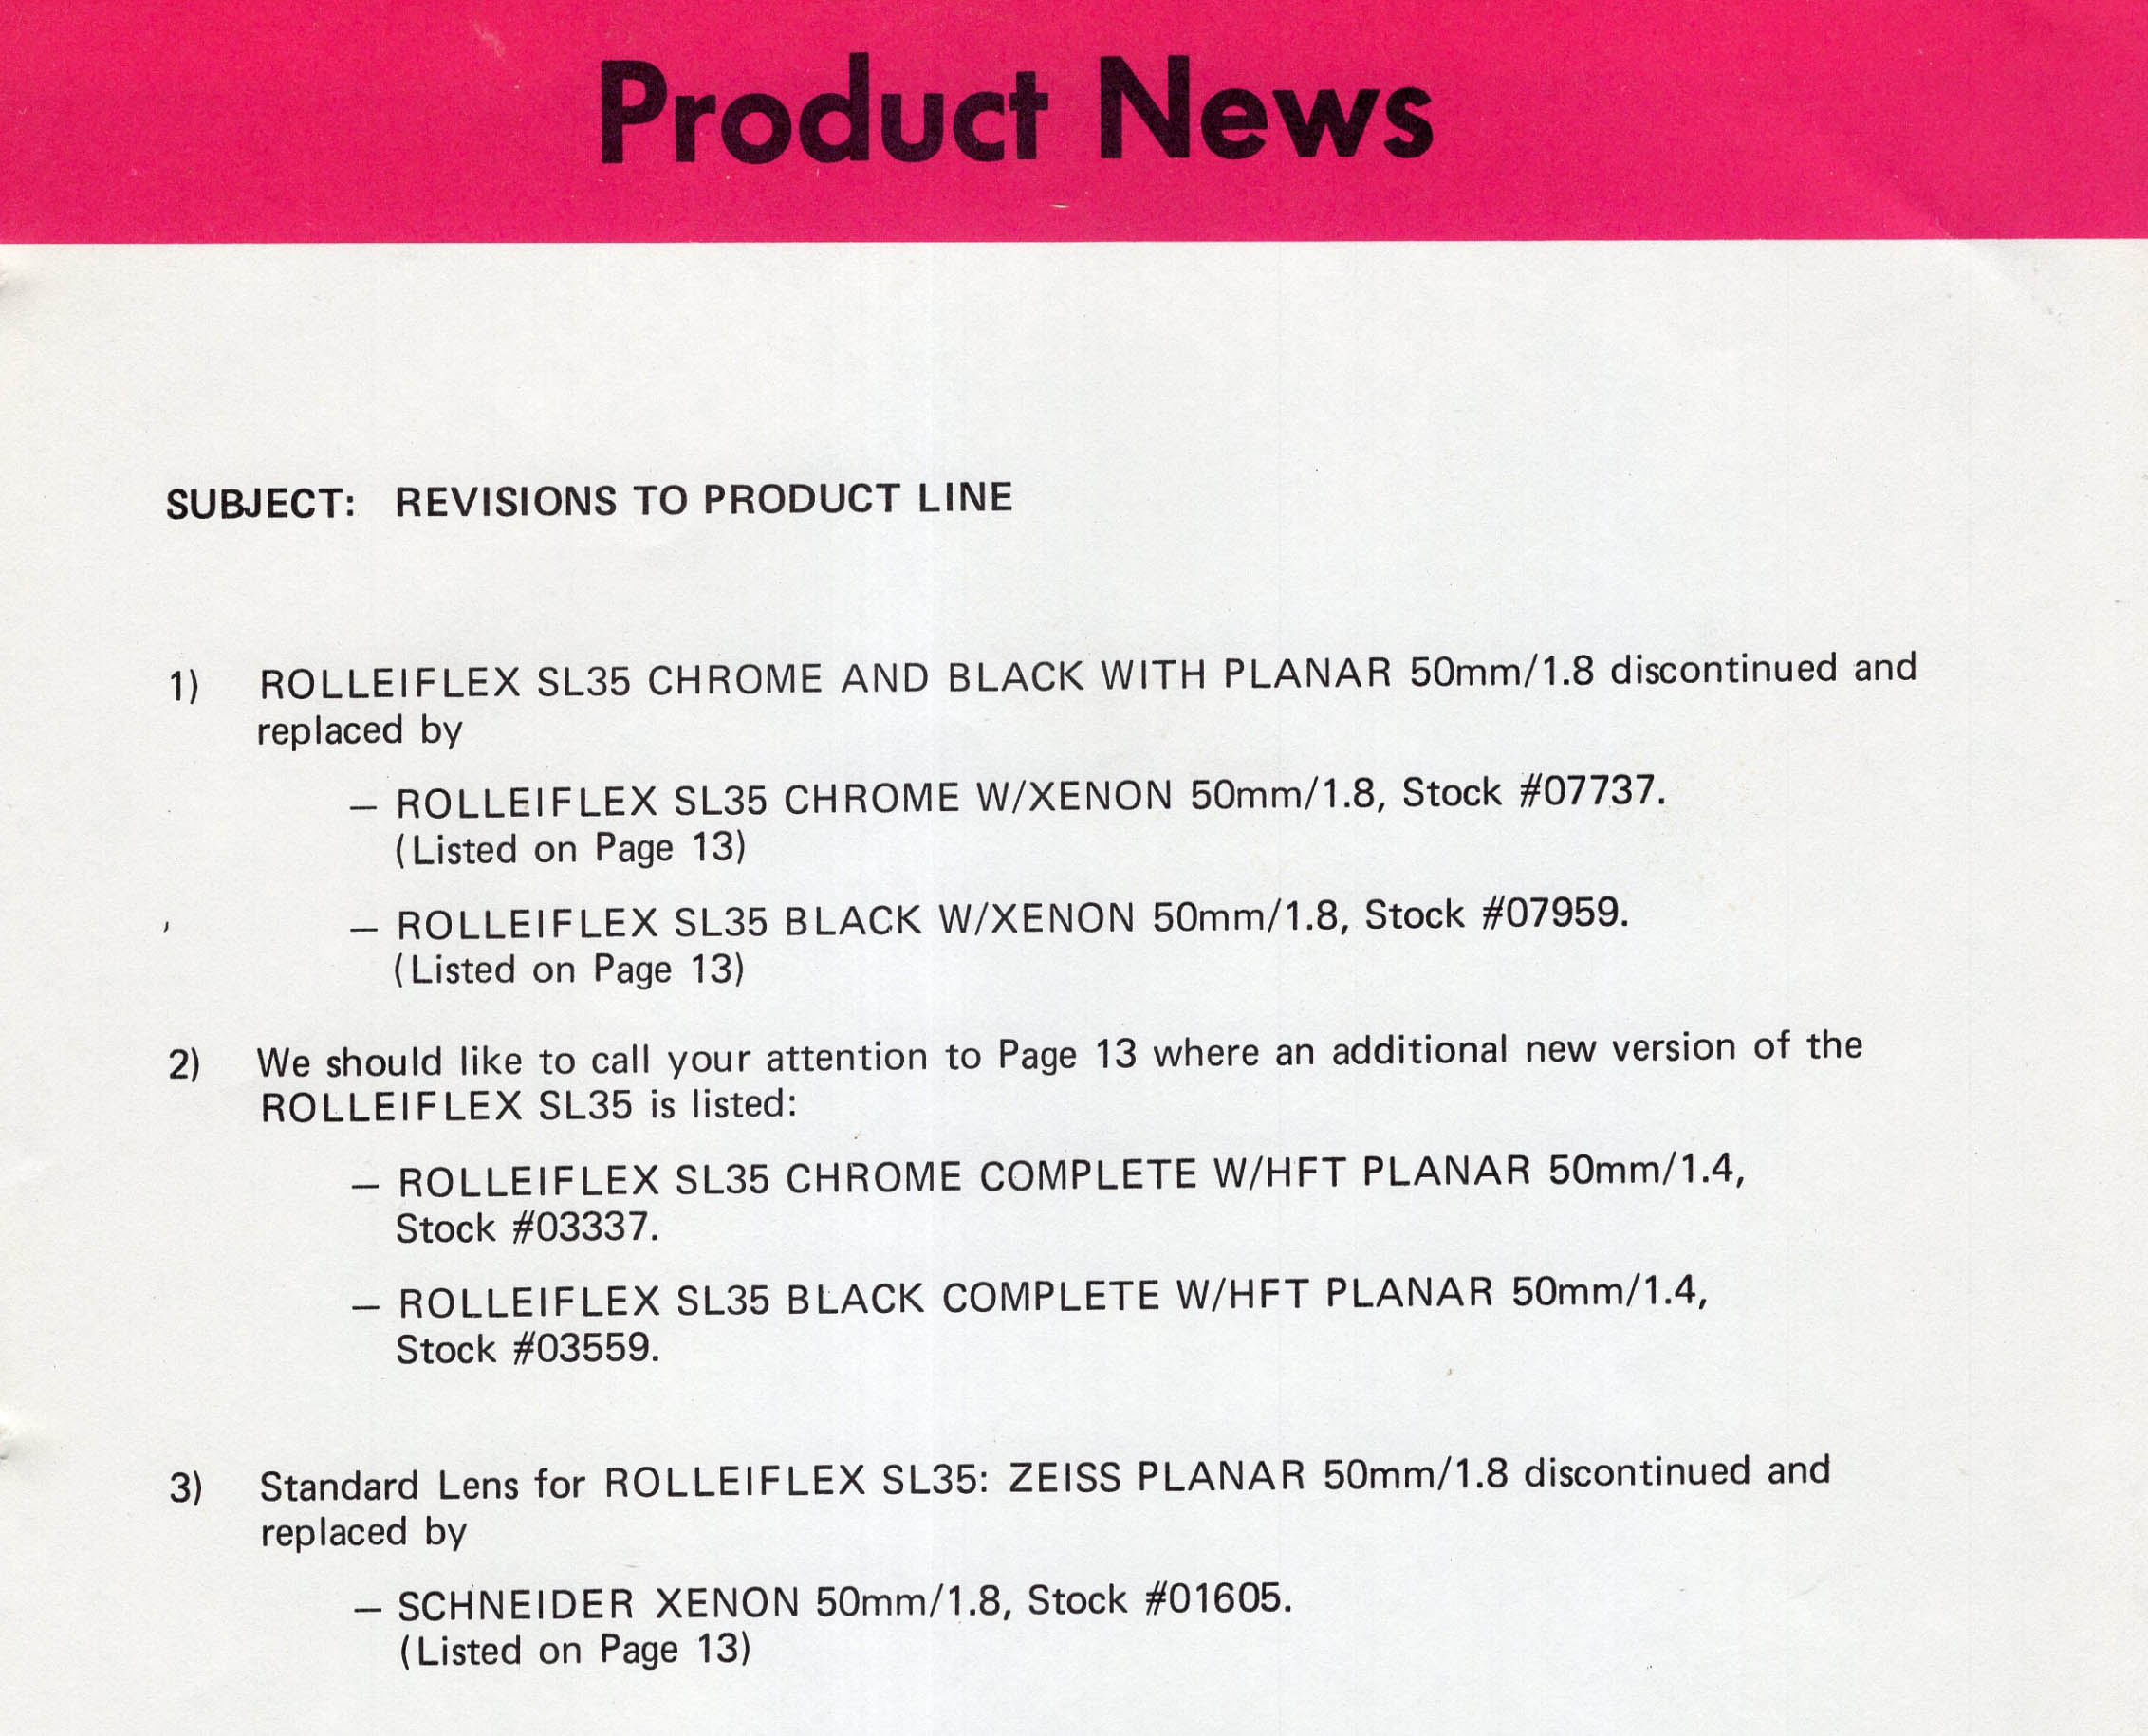 7 September 1973 - Rollei announcing the replacement of the standard lens.